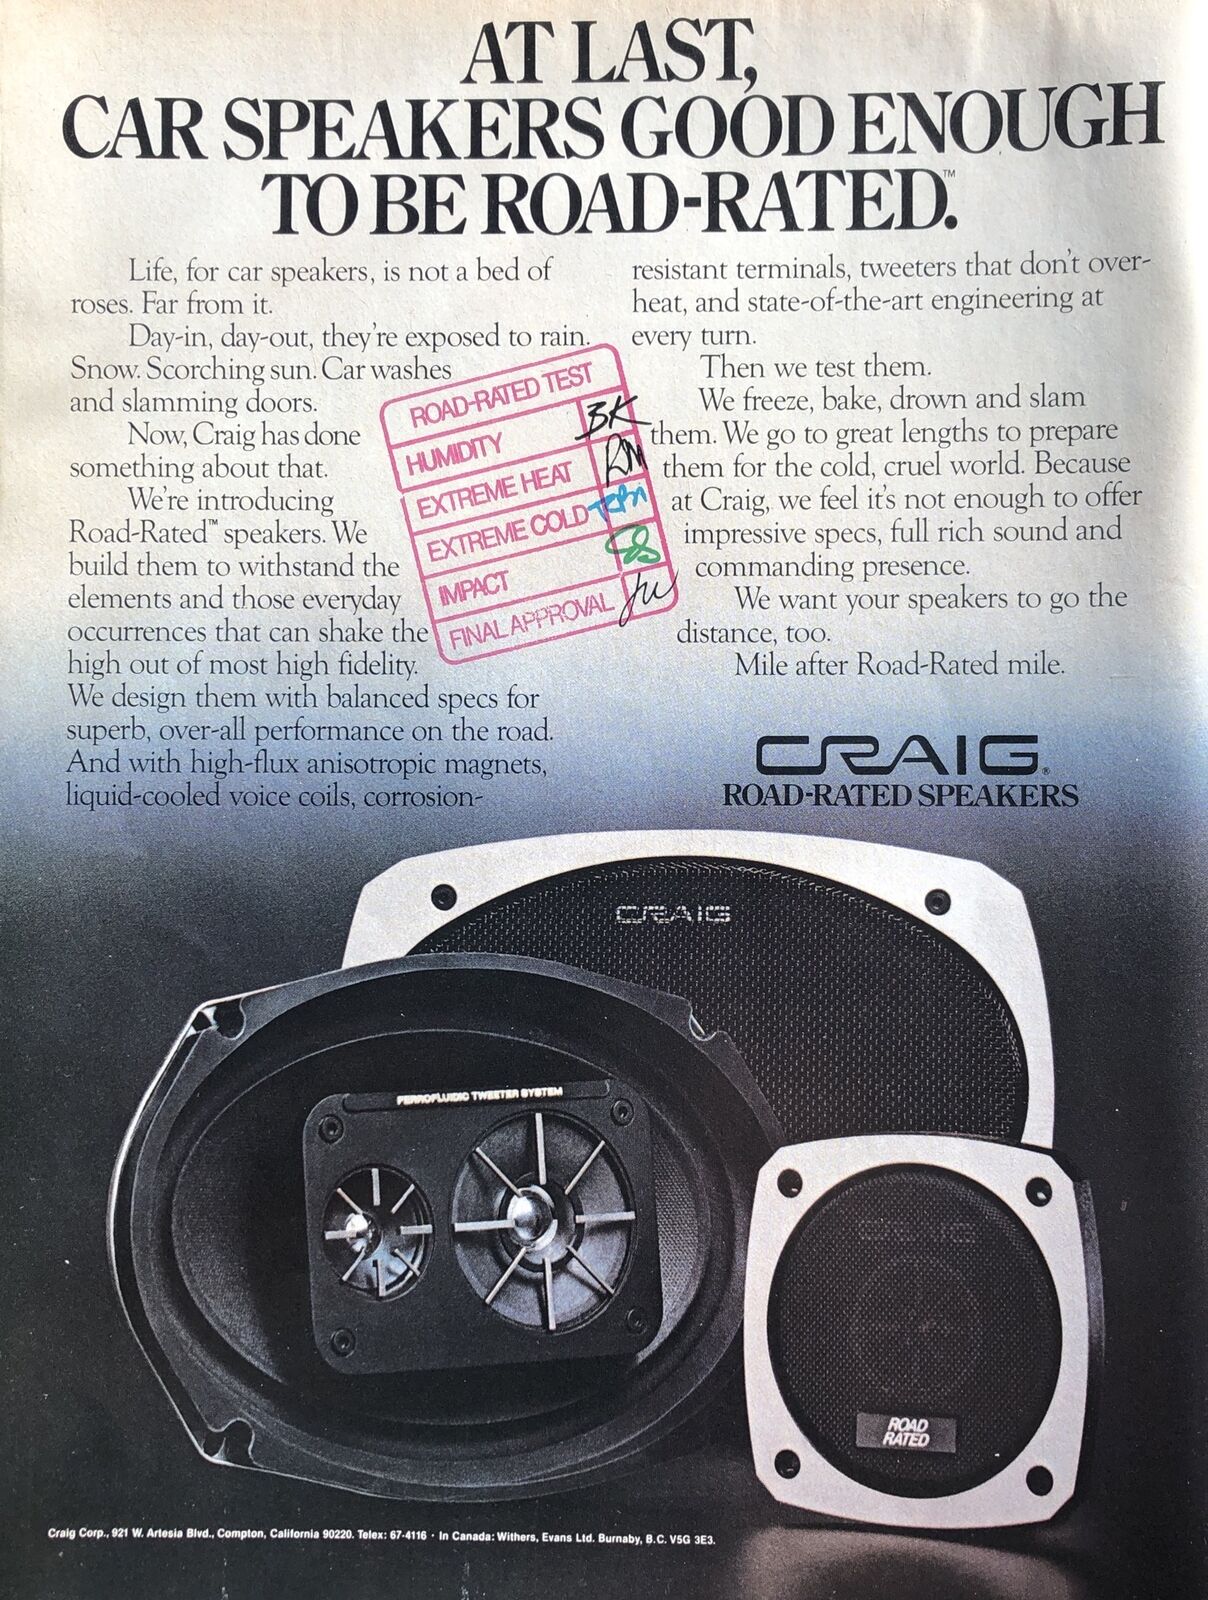 1981 Craig Road-Rated Car Stereo Speakers VTG 1980s 80s PRINT AD At Last